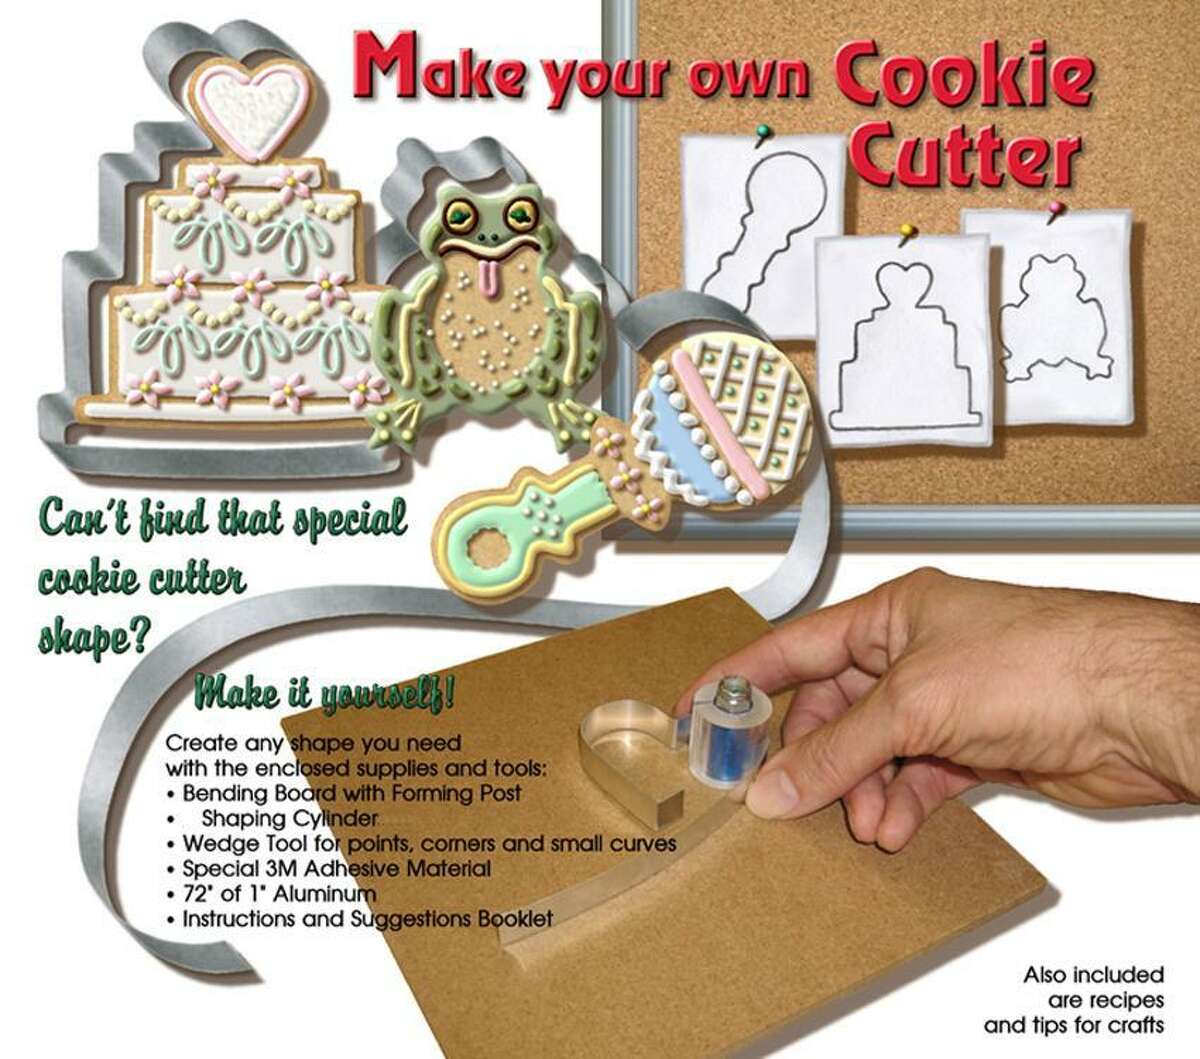 Contributed photo: The Make-your-own Cookie-Cutter kit.